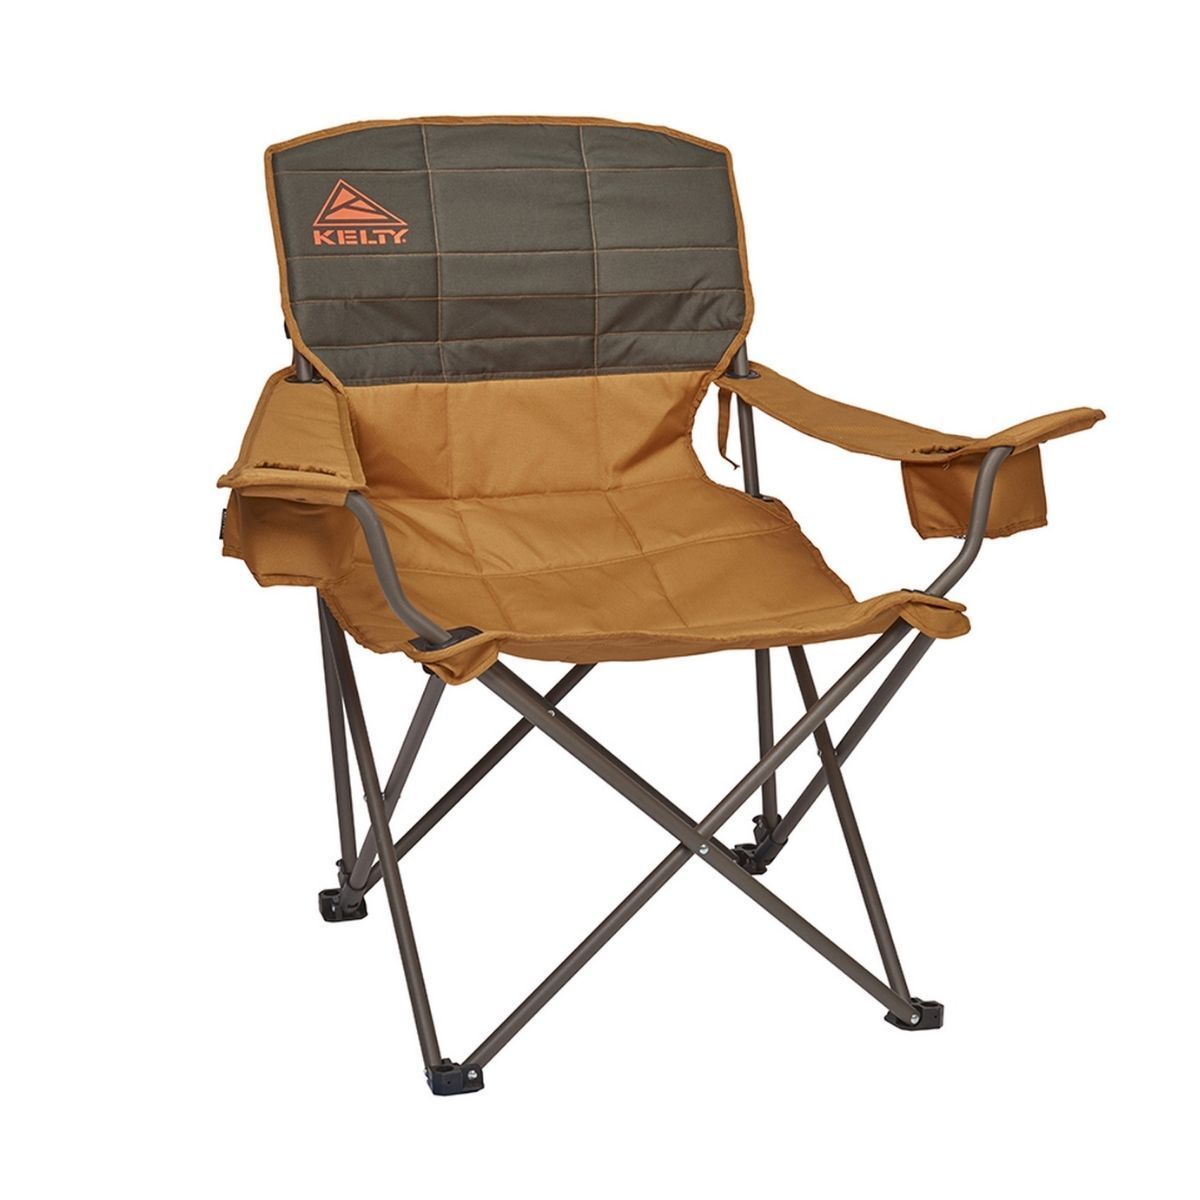 Kelty Deluxe Lounge Chair - Campingstuhl